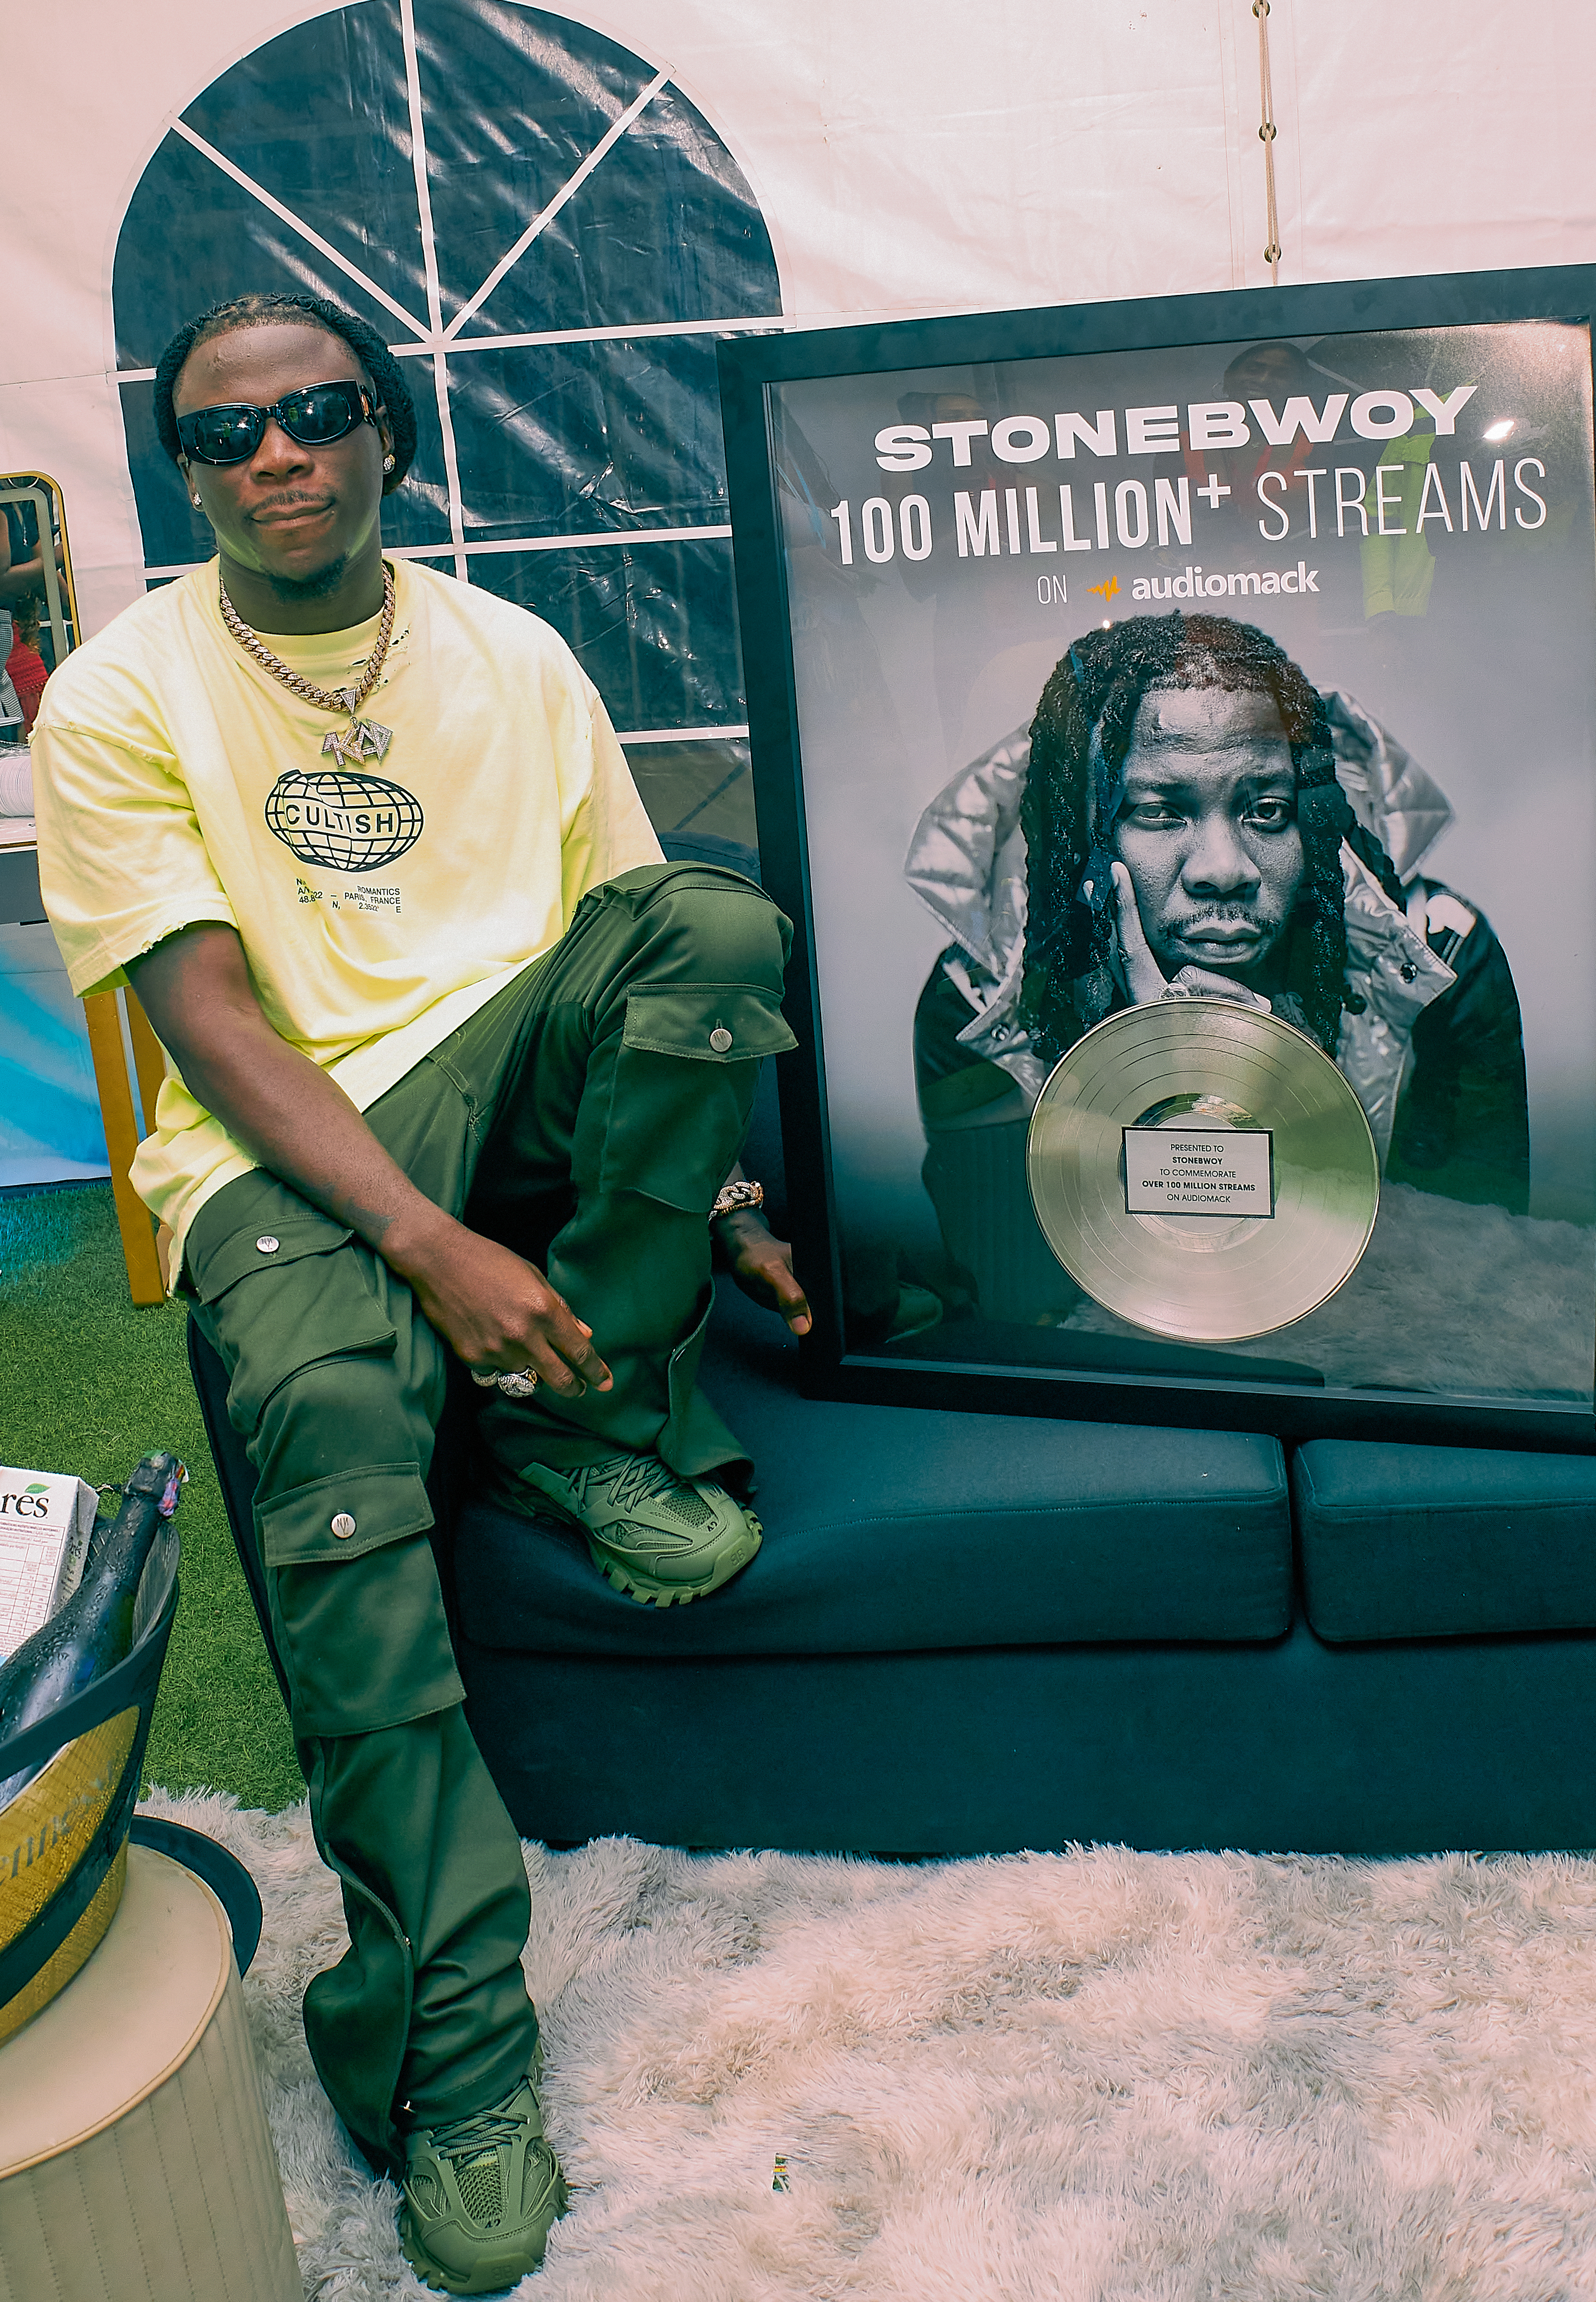 Stonebwoy receives plaque from Audiomack after history-making 100 million streams